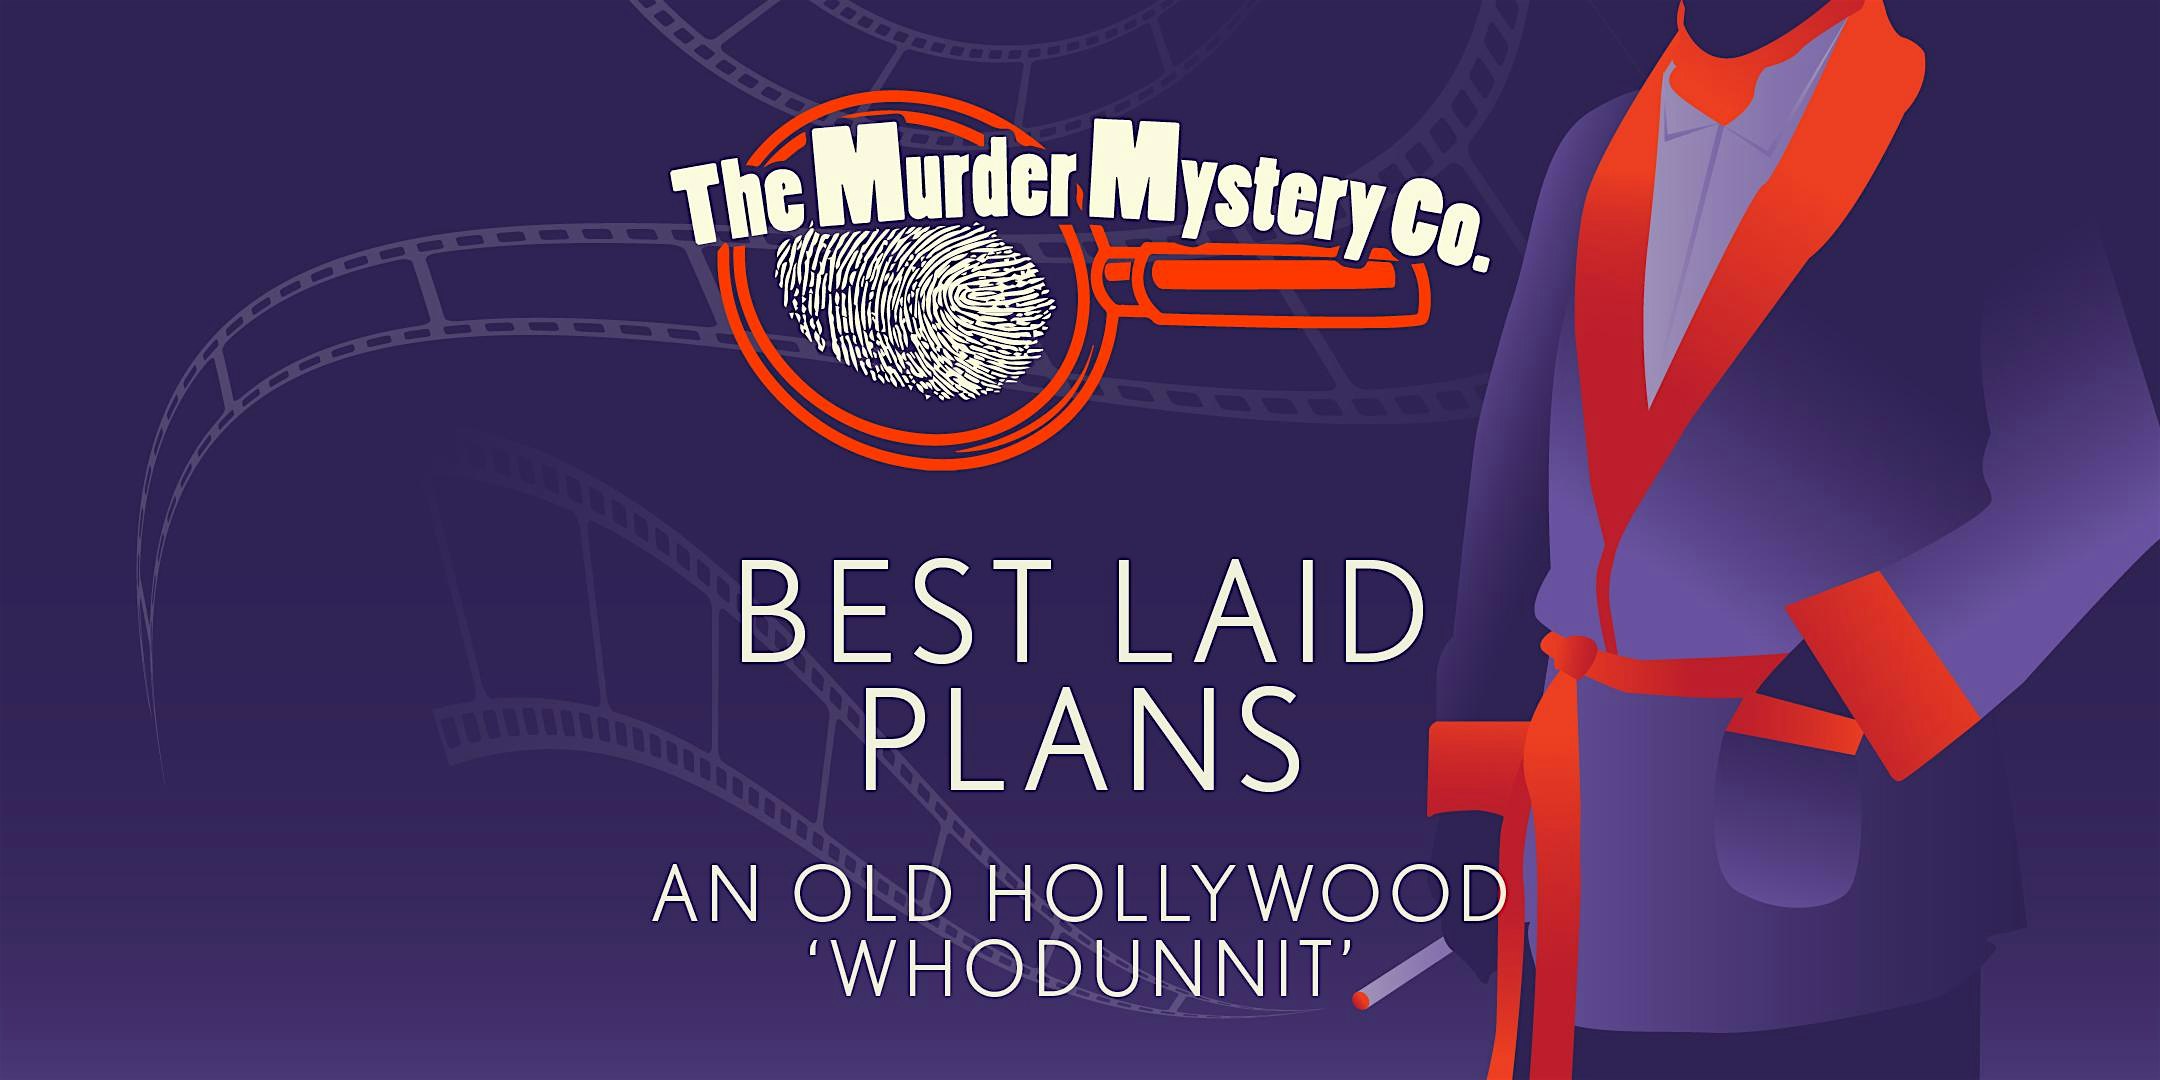 Murder Mystery Dinner Theater Show in Dallas: Best Laid Plans